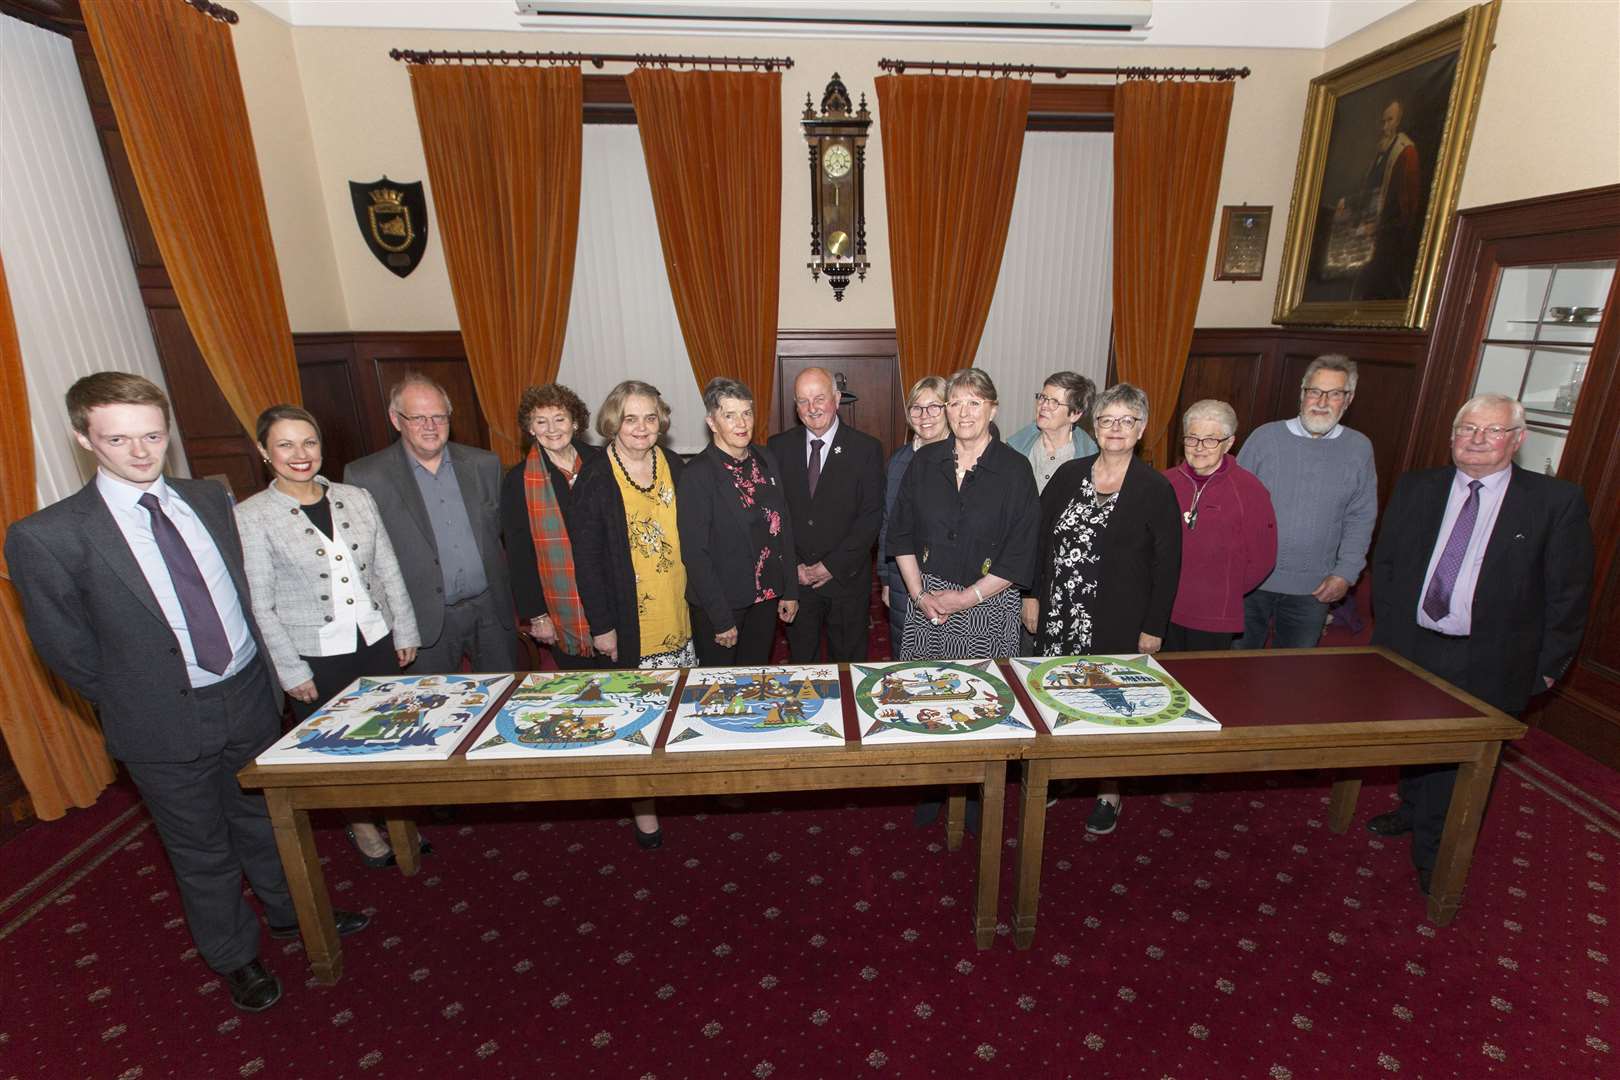 The group who attended the handover of the Icelandic panels in Wick Town Hall. Picture: Robert MacDonald / Northern Studios